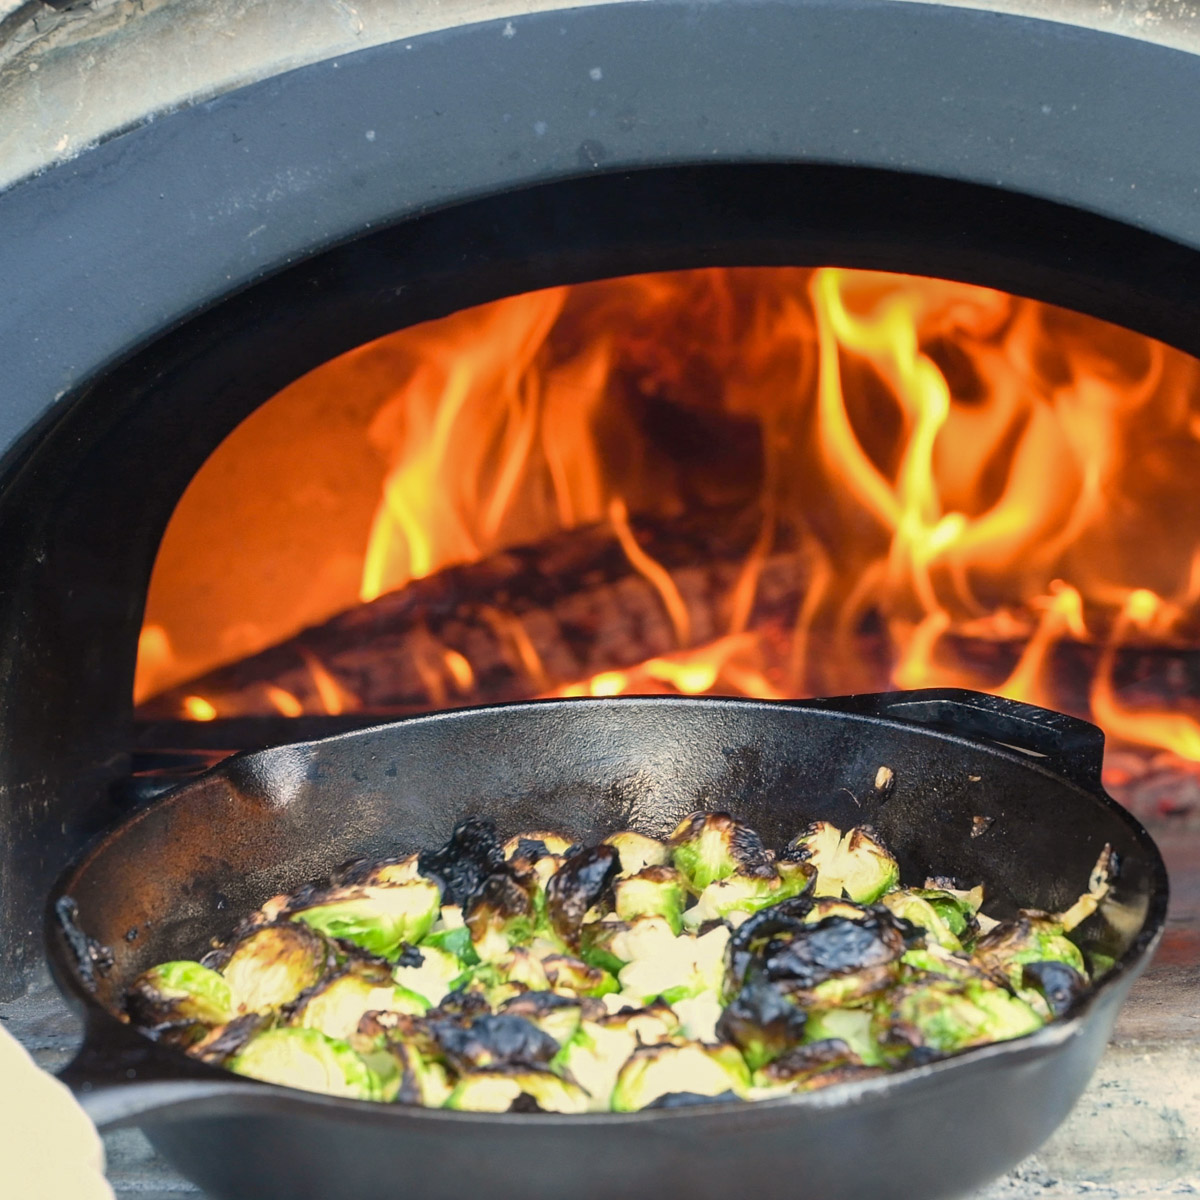 Brussels sprouts roasting in a wood-fired oven.